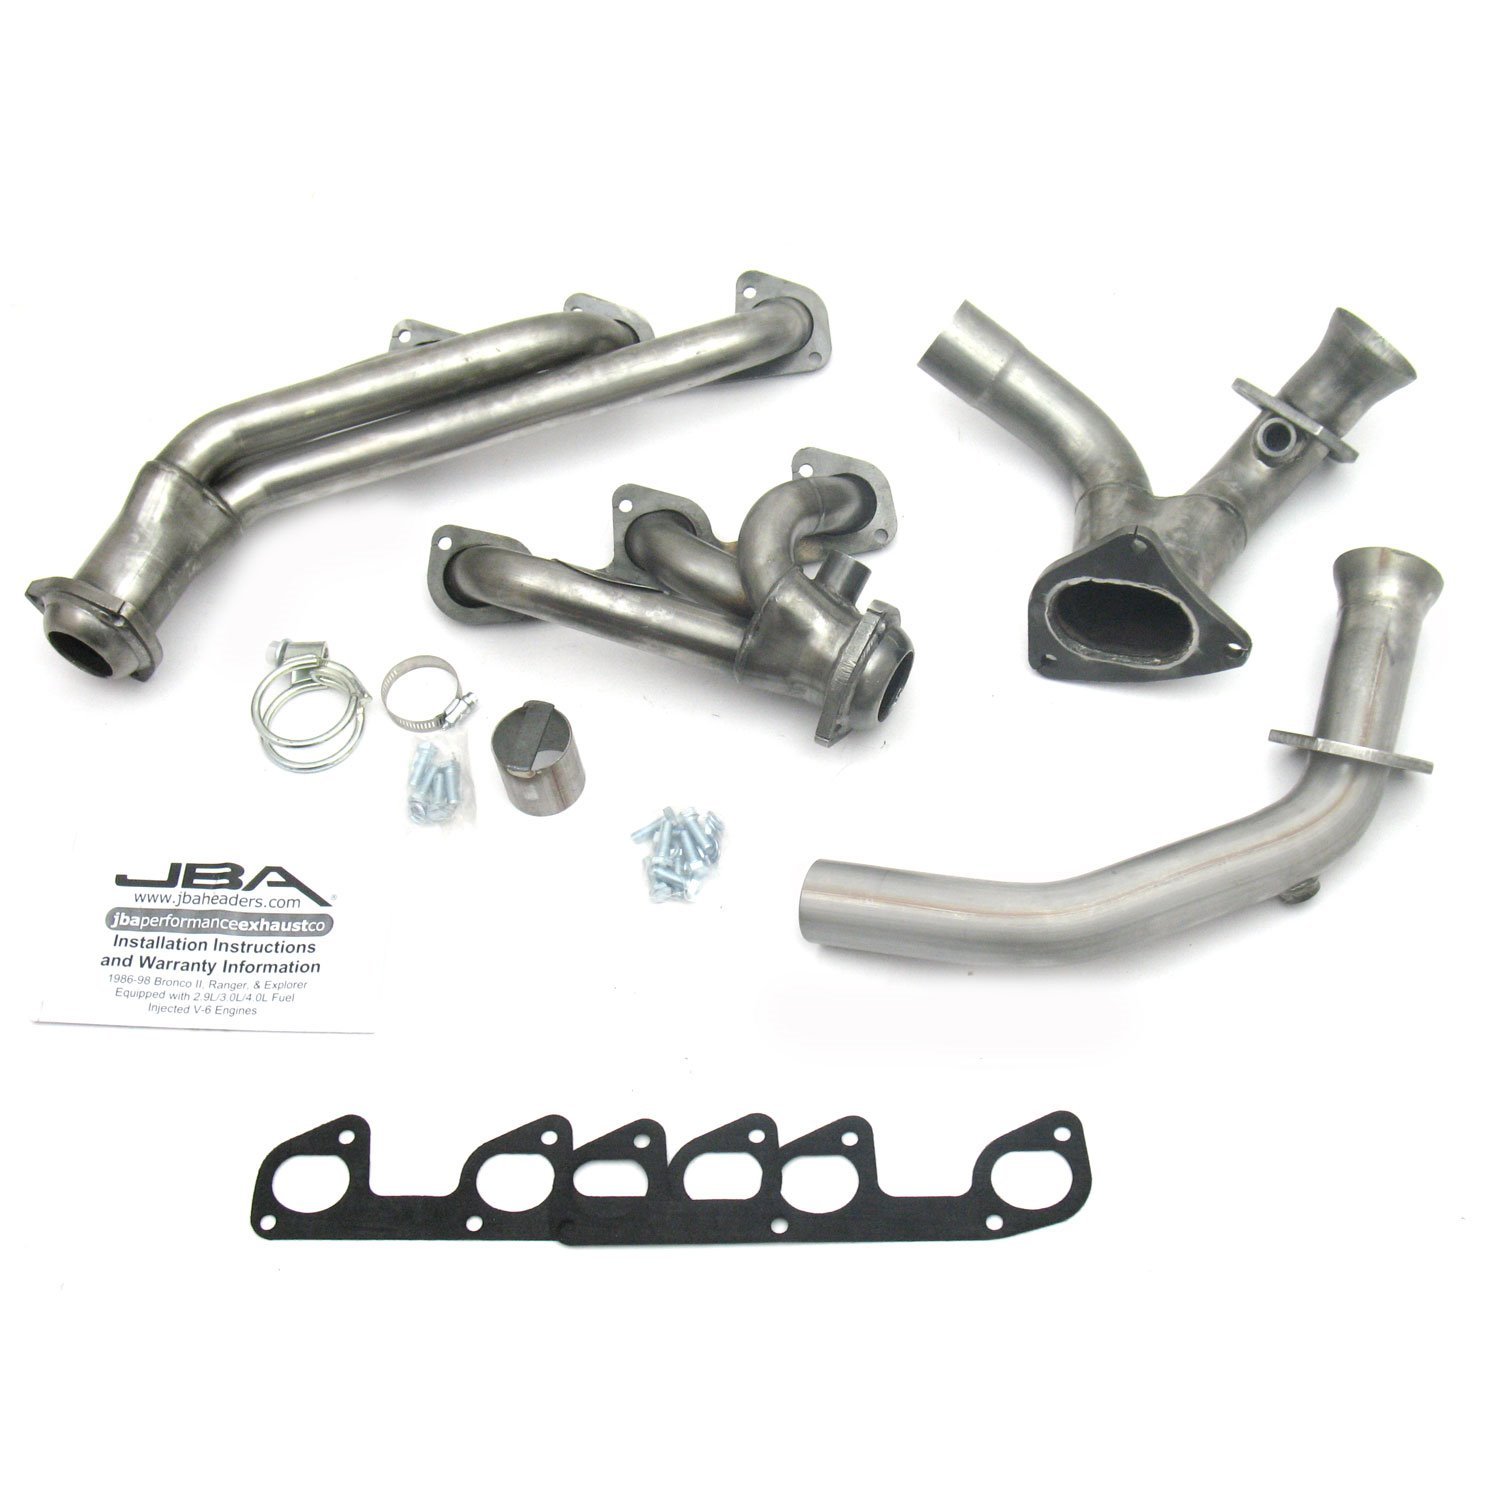 Headers 1995-1997 RANGER 4.0L V-6 INCLUDES Y-PIPE Carb